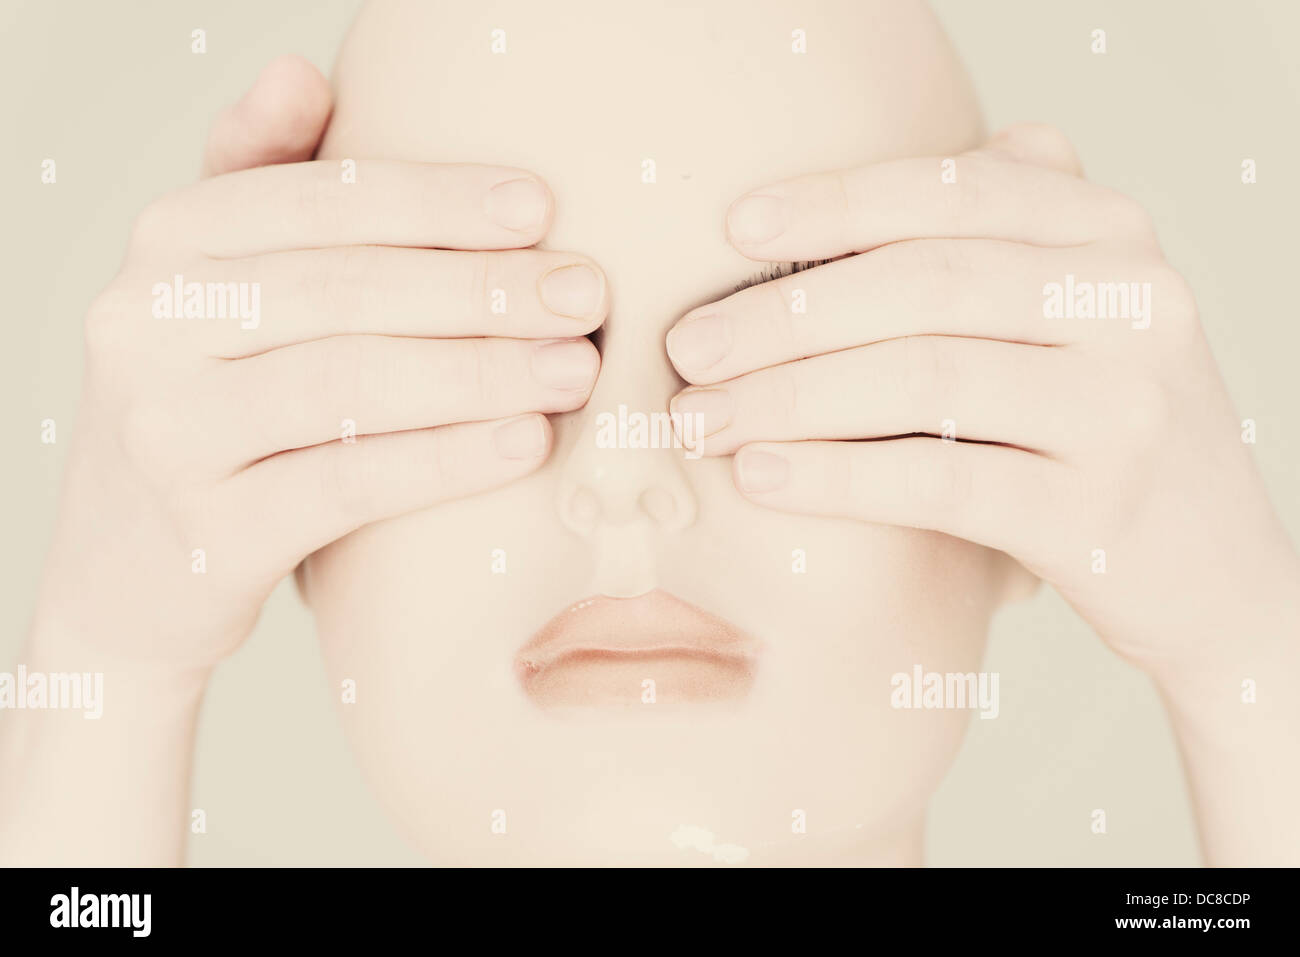 Head of mannequin with human hands covering the eyes Stock Photo